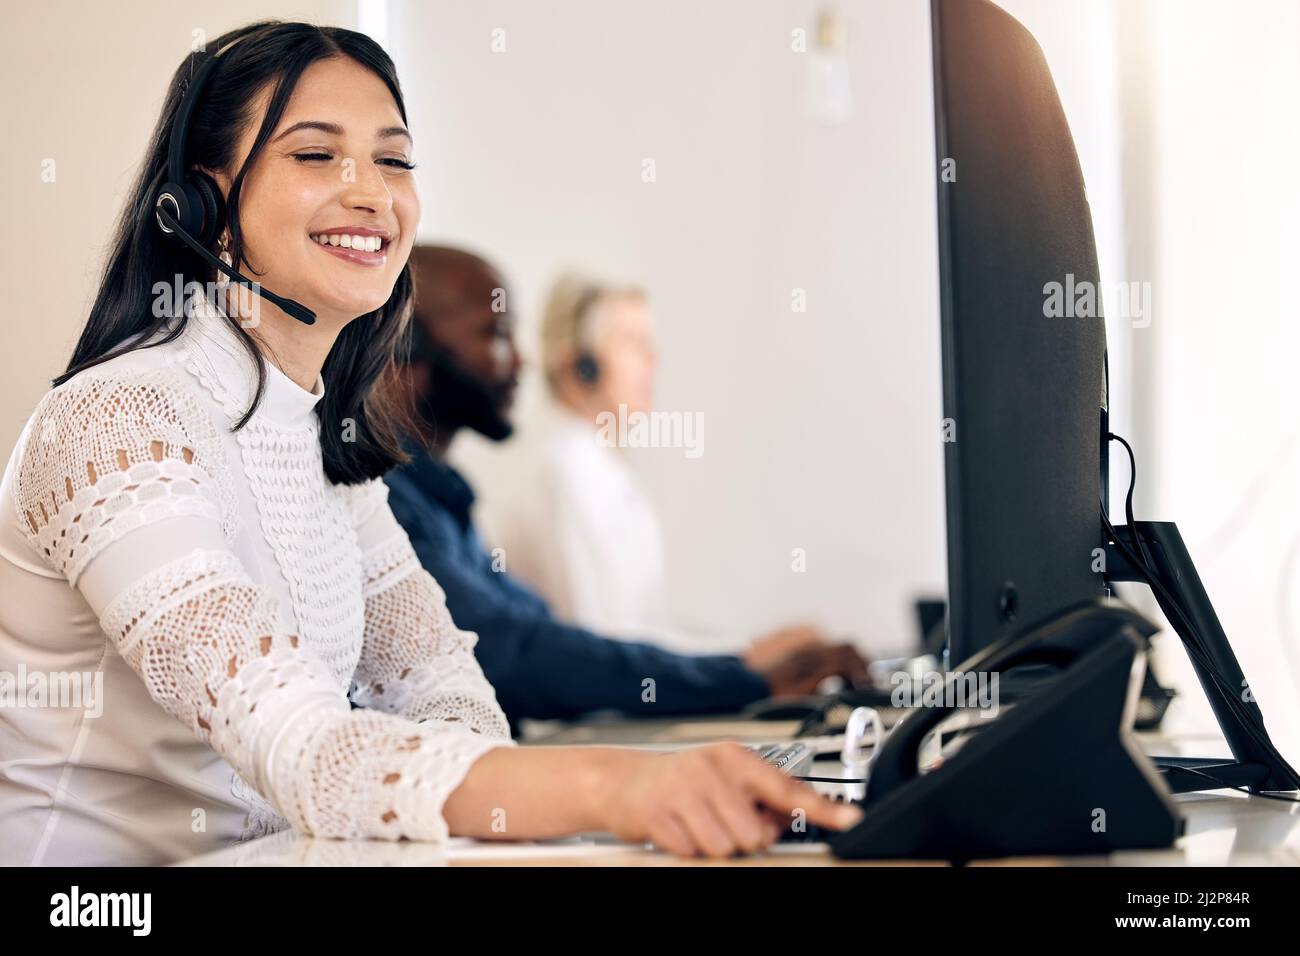 Ill call the customer right away to deliver the good news. Shot of a young call centre agent using a telephone while working on a computer in an Stock Photo